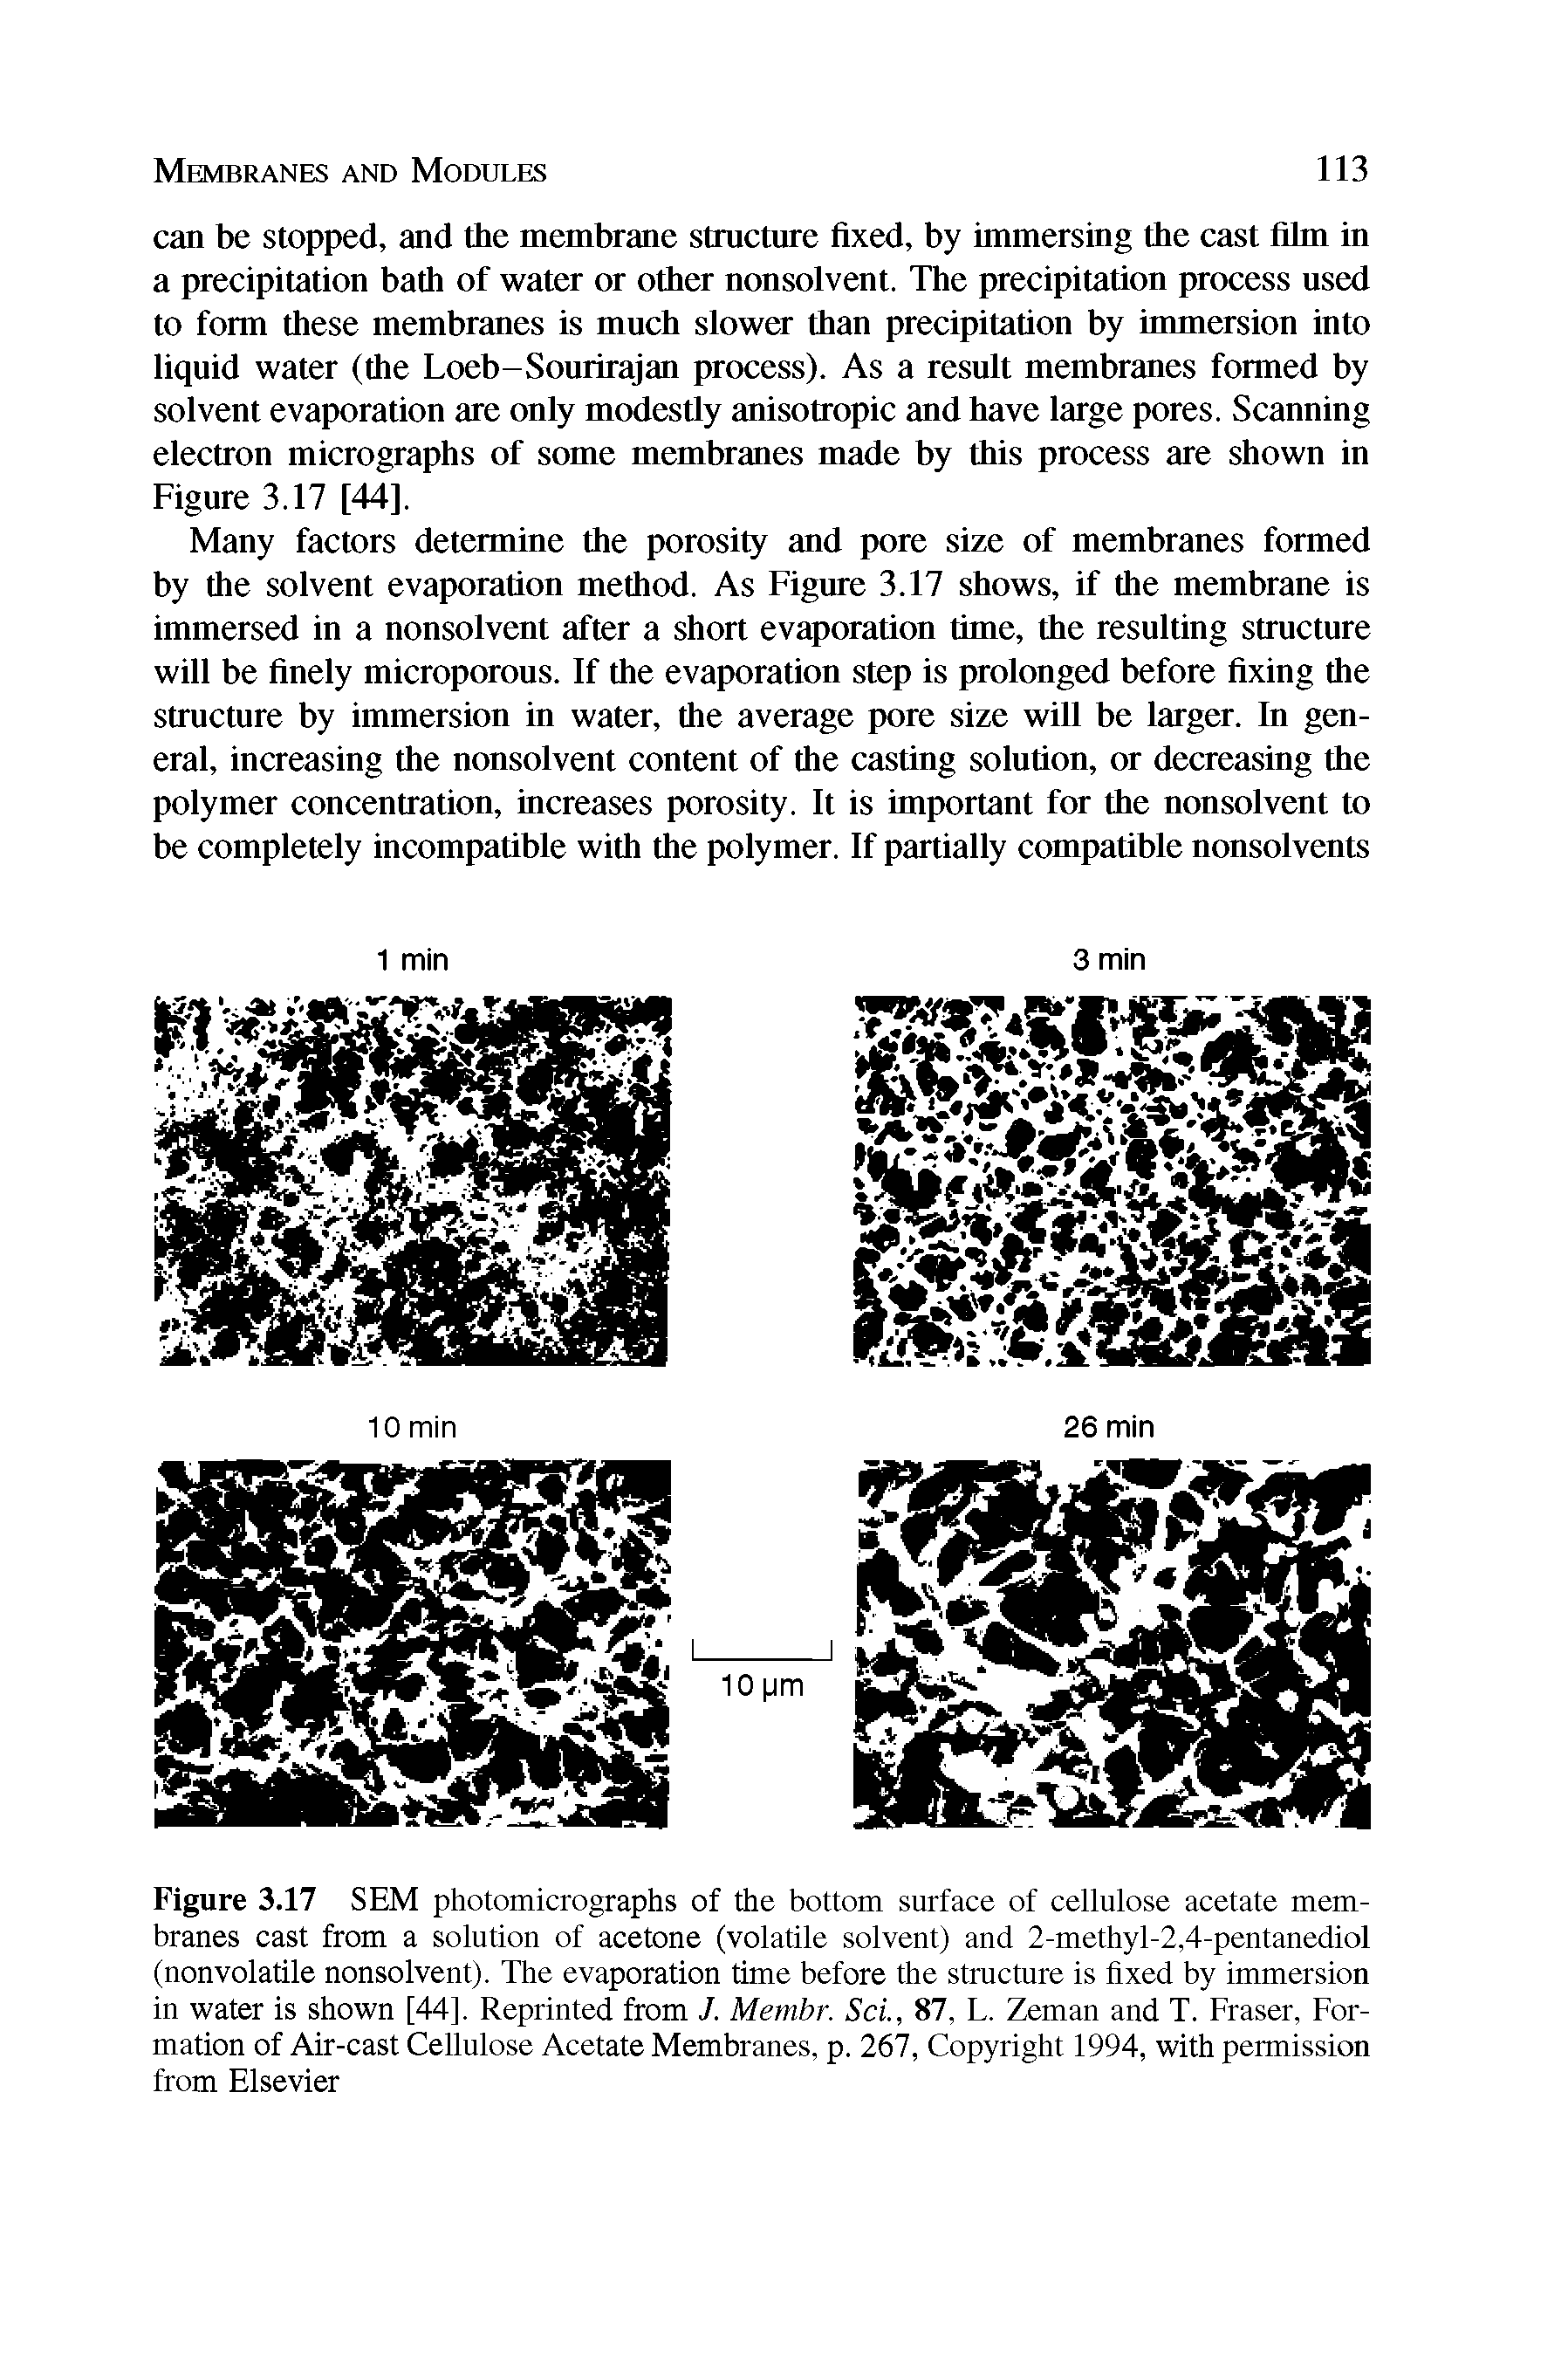 Figure 3.17 SEM photomicrographs of the bottom surface of cellulose acetate membranes cast from a solution of acetone (volatile solvent) and 2-methyl-2,4-pentanediol (nonvolatile nonsolvent). The evaporation time before the structure is fixed by immersion in water is shown [44]. Reprinted from J. Membr. Sci., 87, L. Zeman and T. Fraser, Formation of Air-cast Cellulose Acetate Membranes, p. 267, Copyright 1994, with permission from Elsevier...